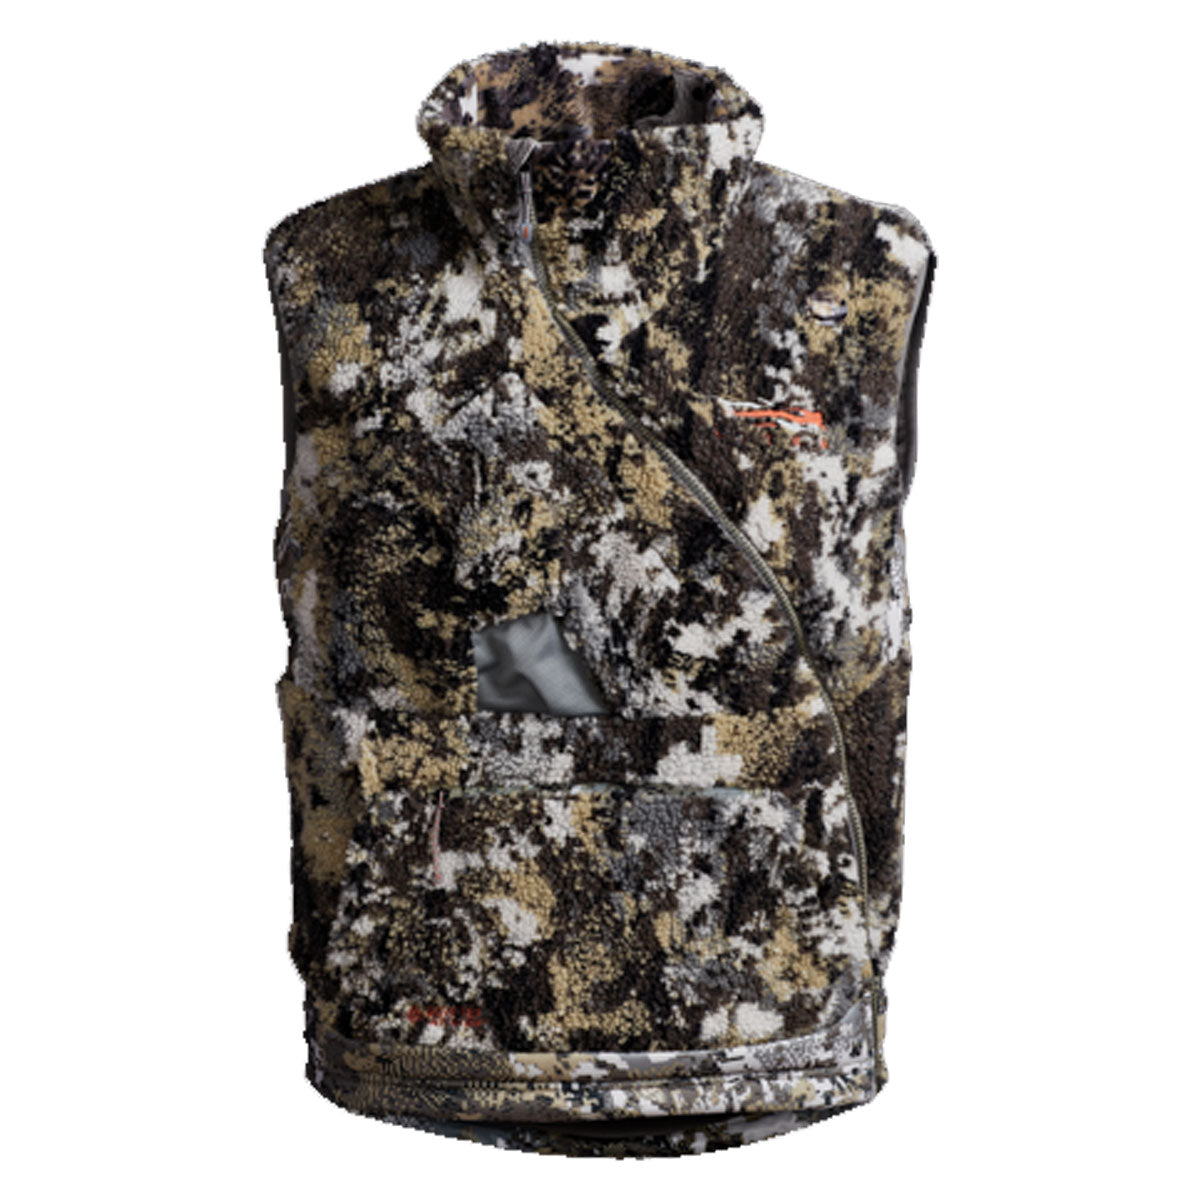 Sitka Fanatic Vest in  by GOHUNT | Sitka - GOHUNT Shop